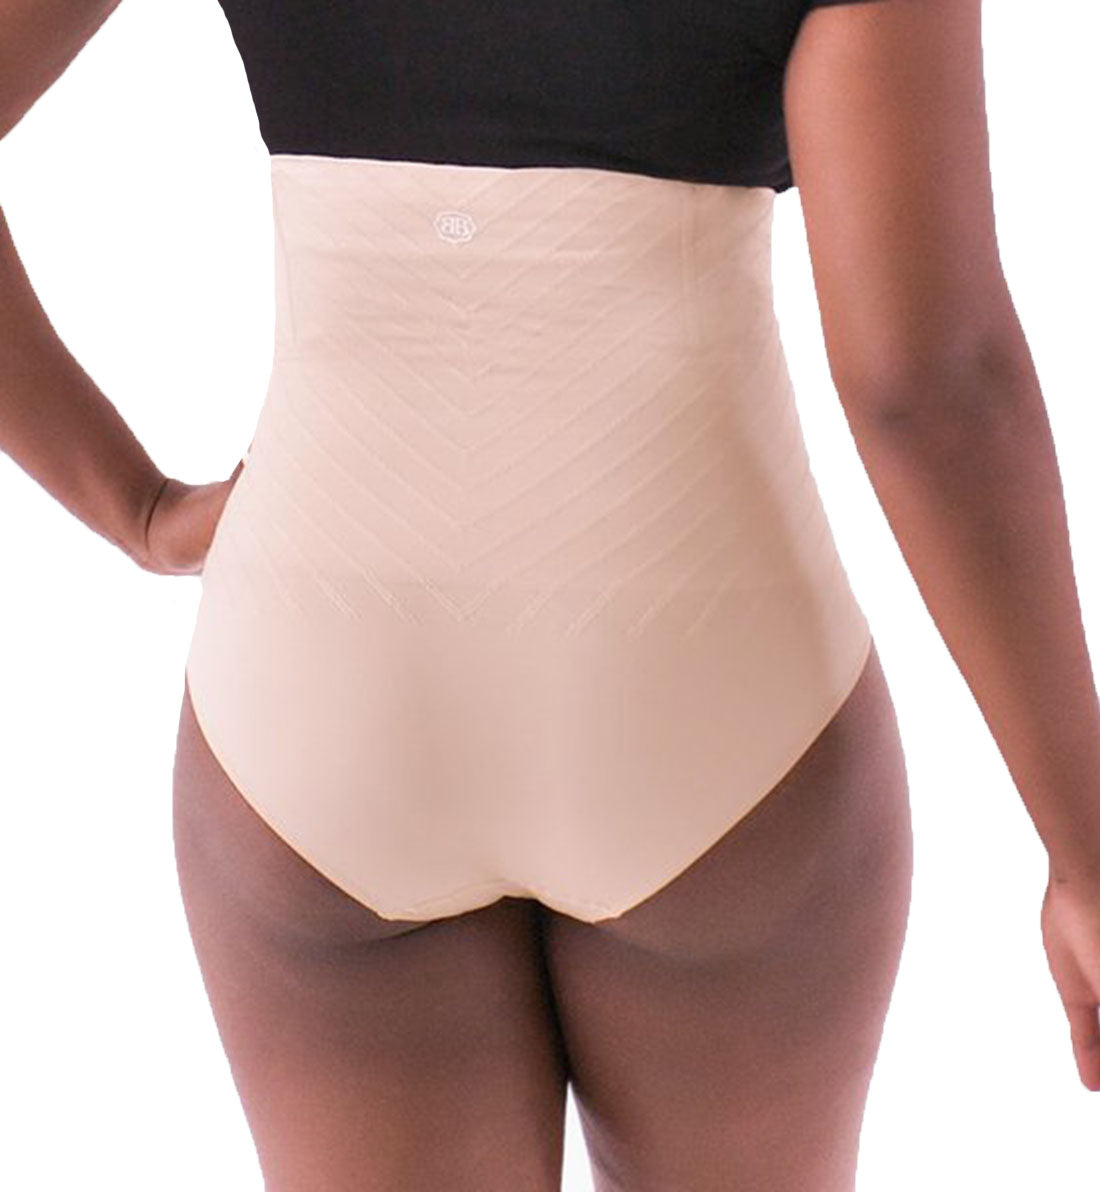 Belly Bandit C-Section & Recovery Undies (CSECUN),Large,Nude - Nude,Large